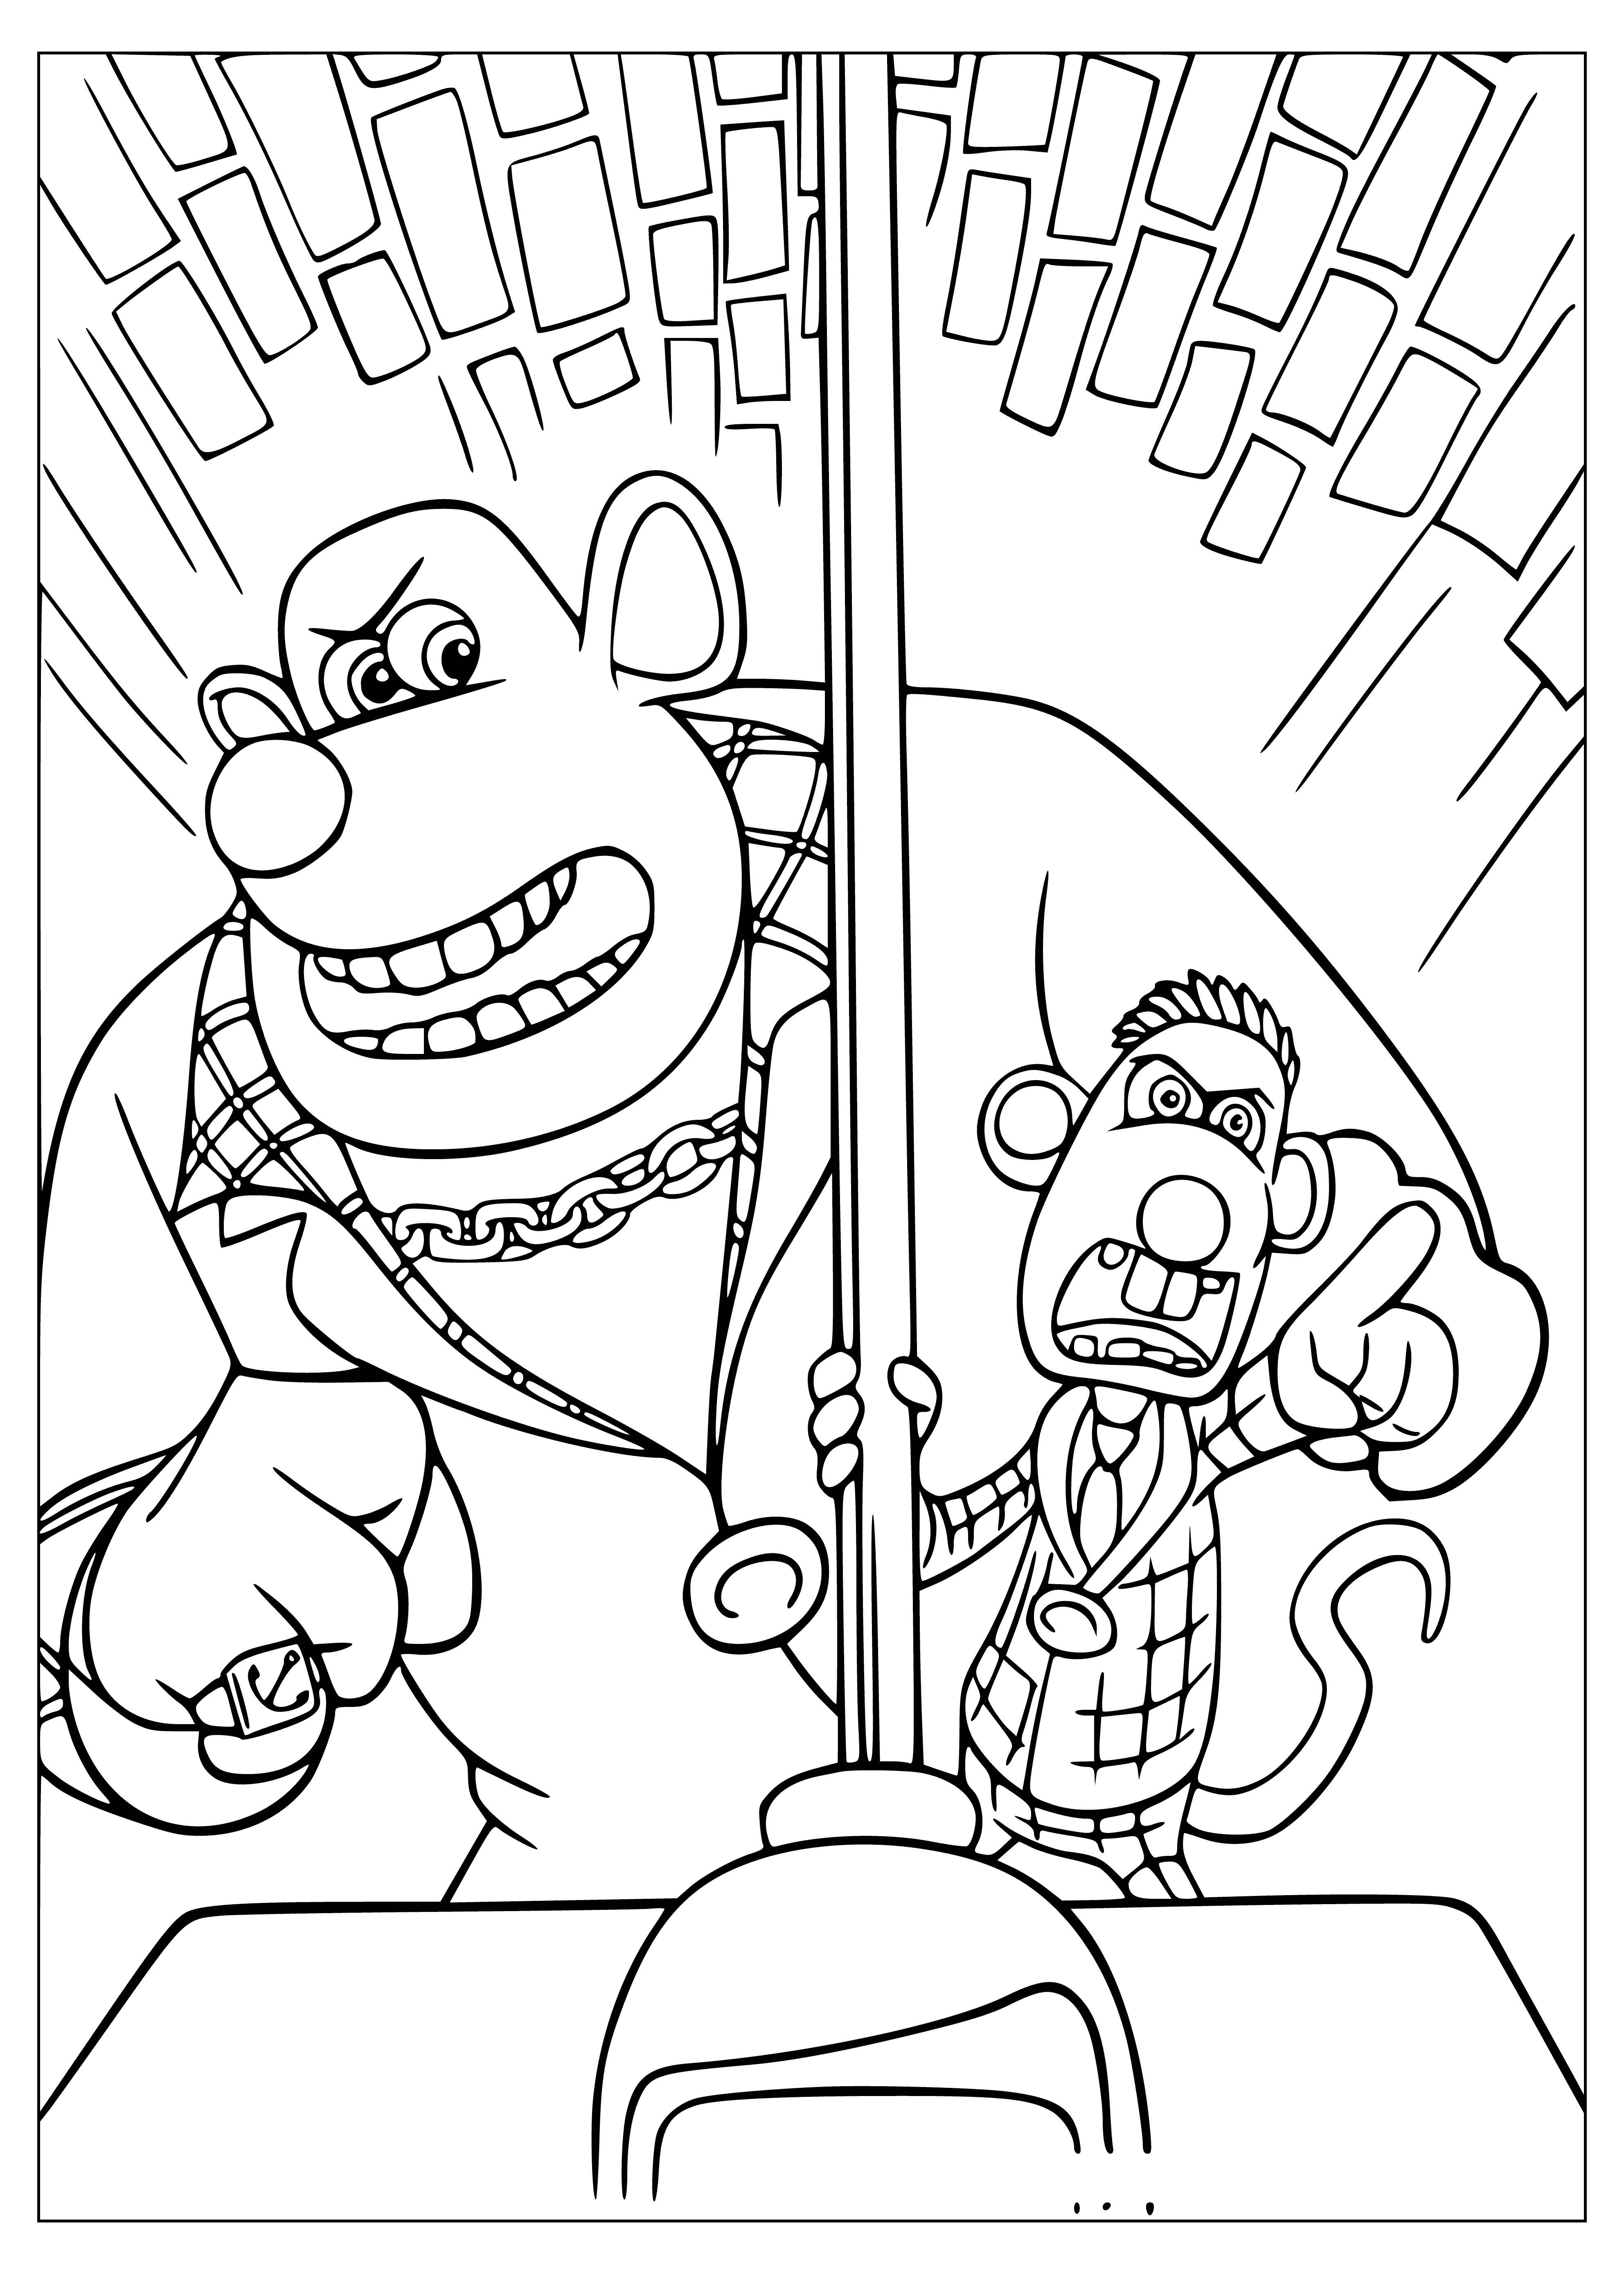 coloring page: Four rats in a flushed away sewer wearing clothes & bandanas, each looking in a different direction & showing teeth.